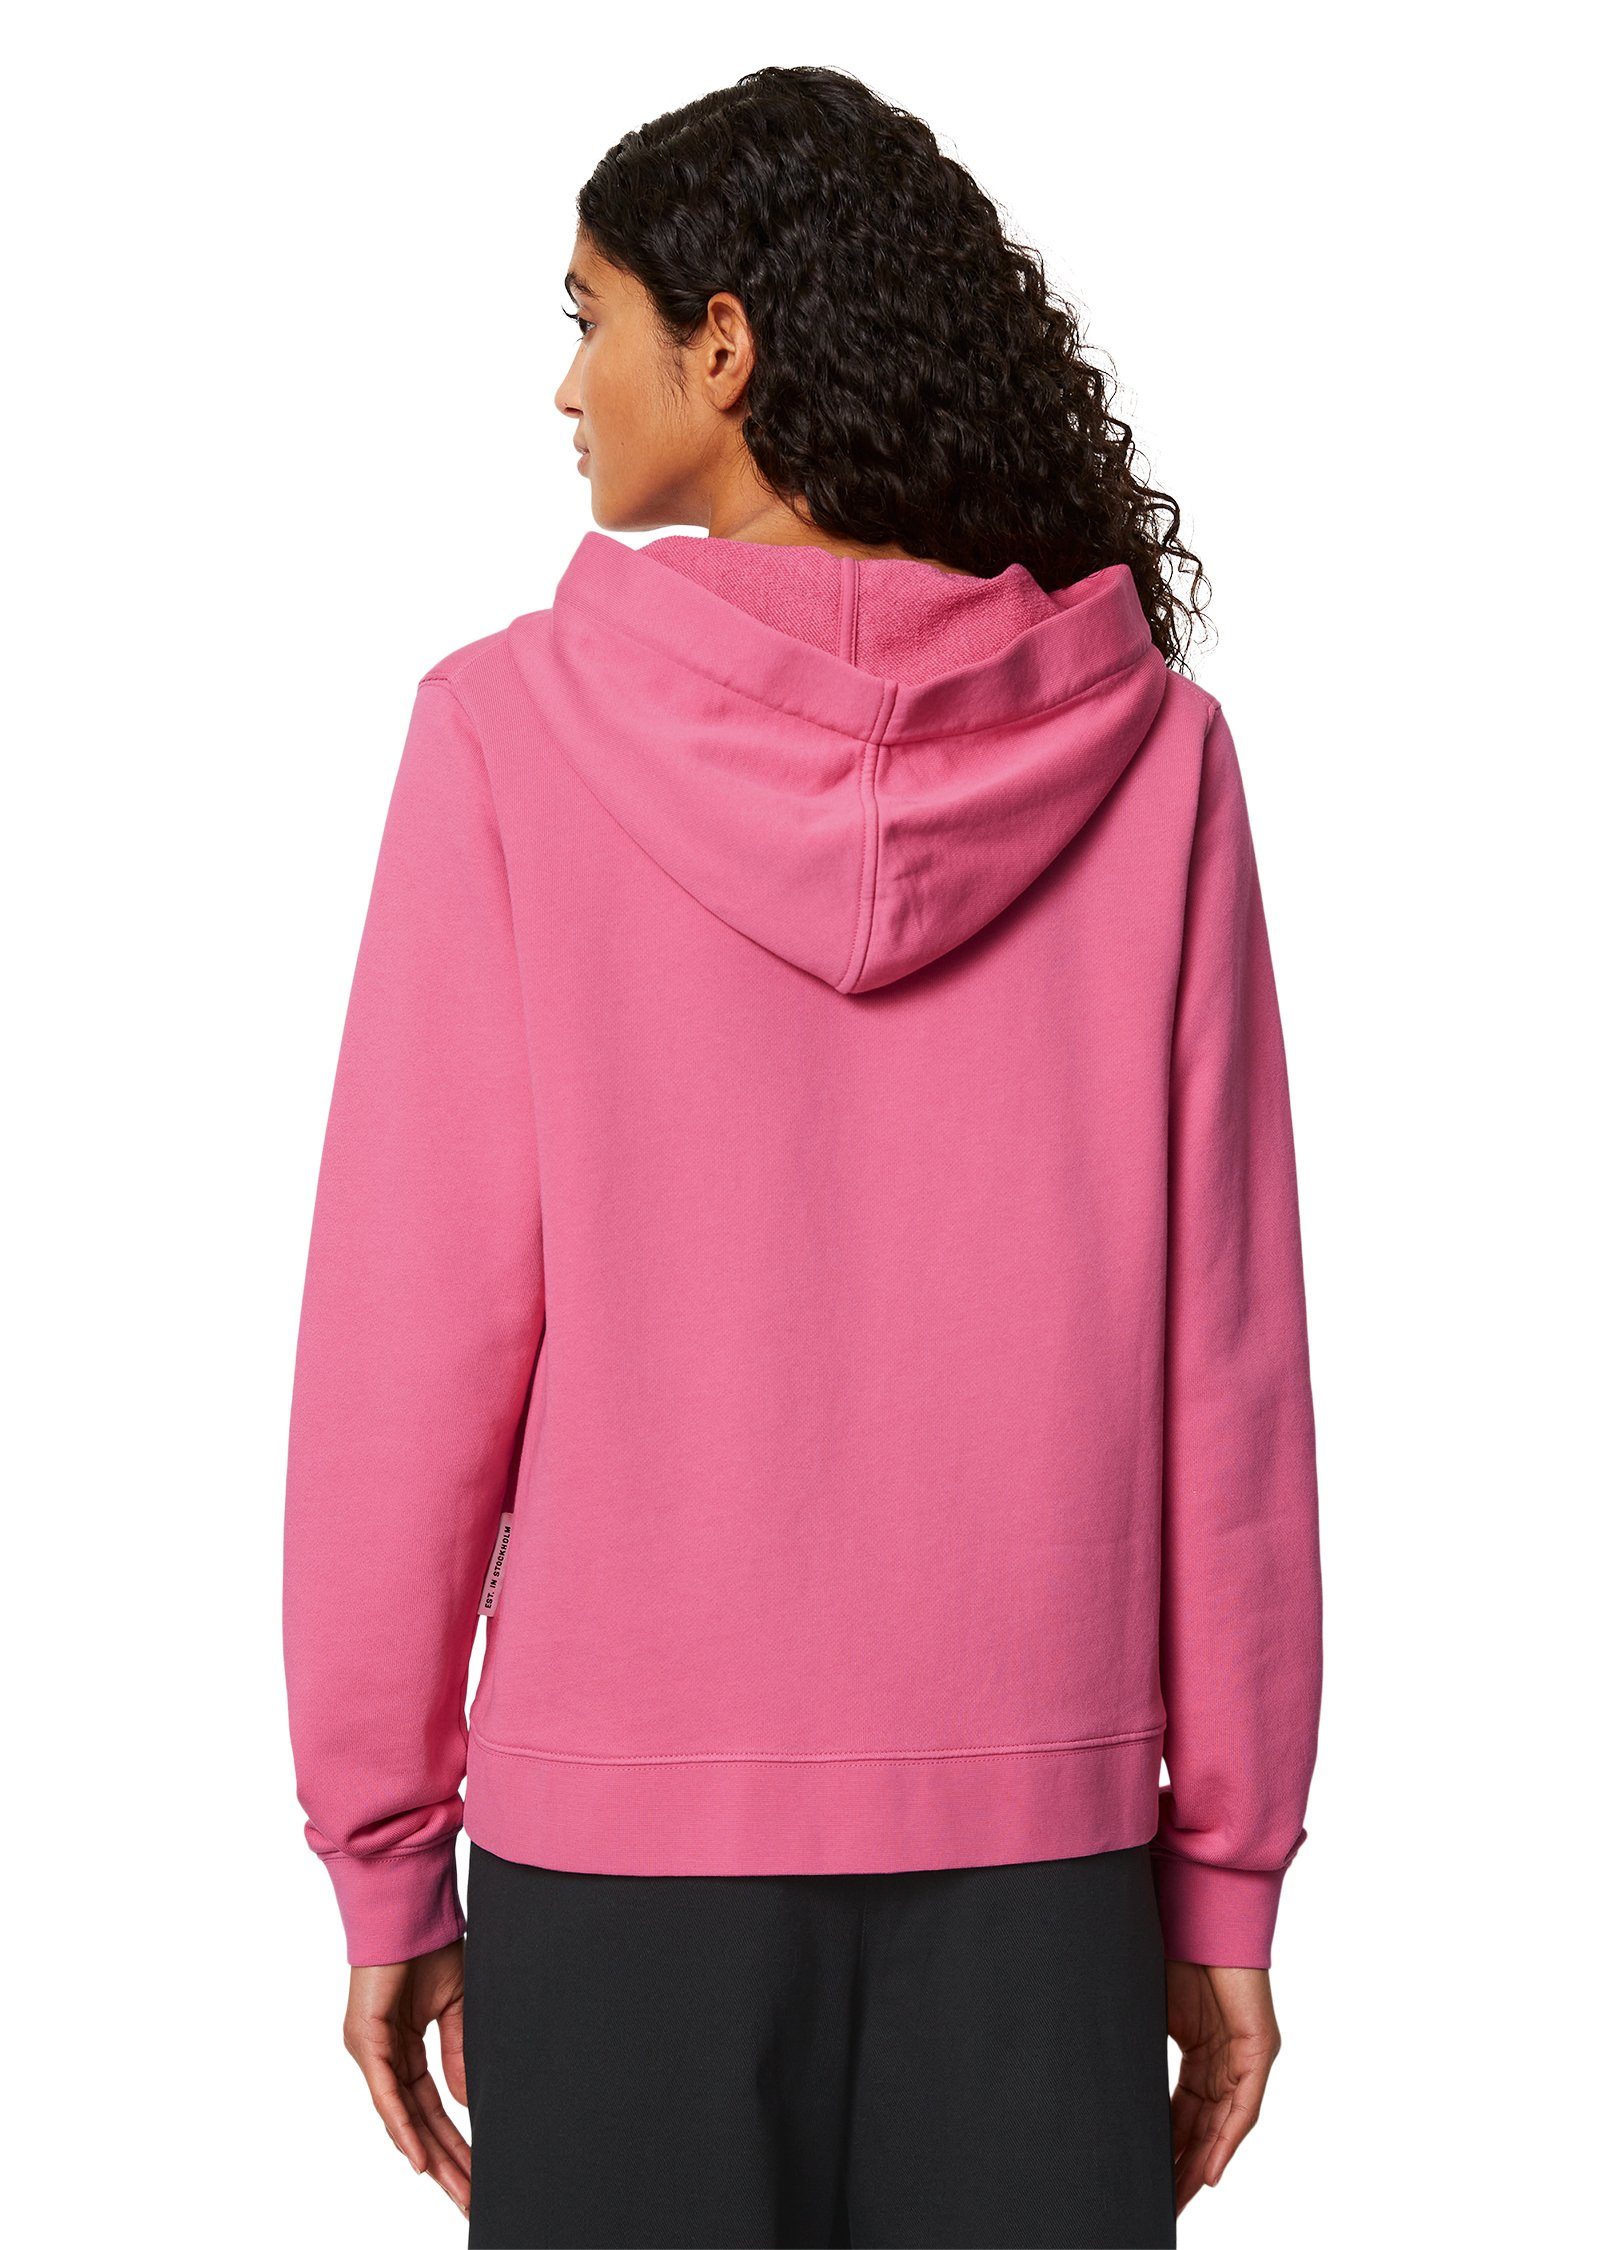 Marc O'Polo rose pink Hoodie